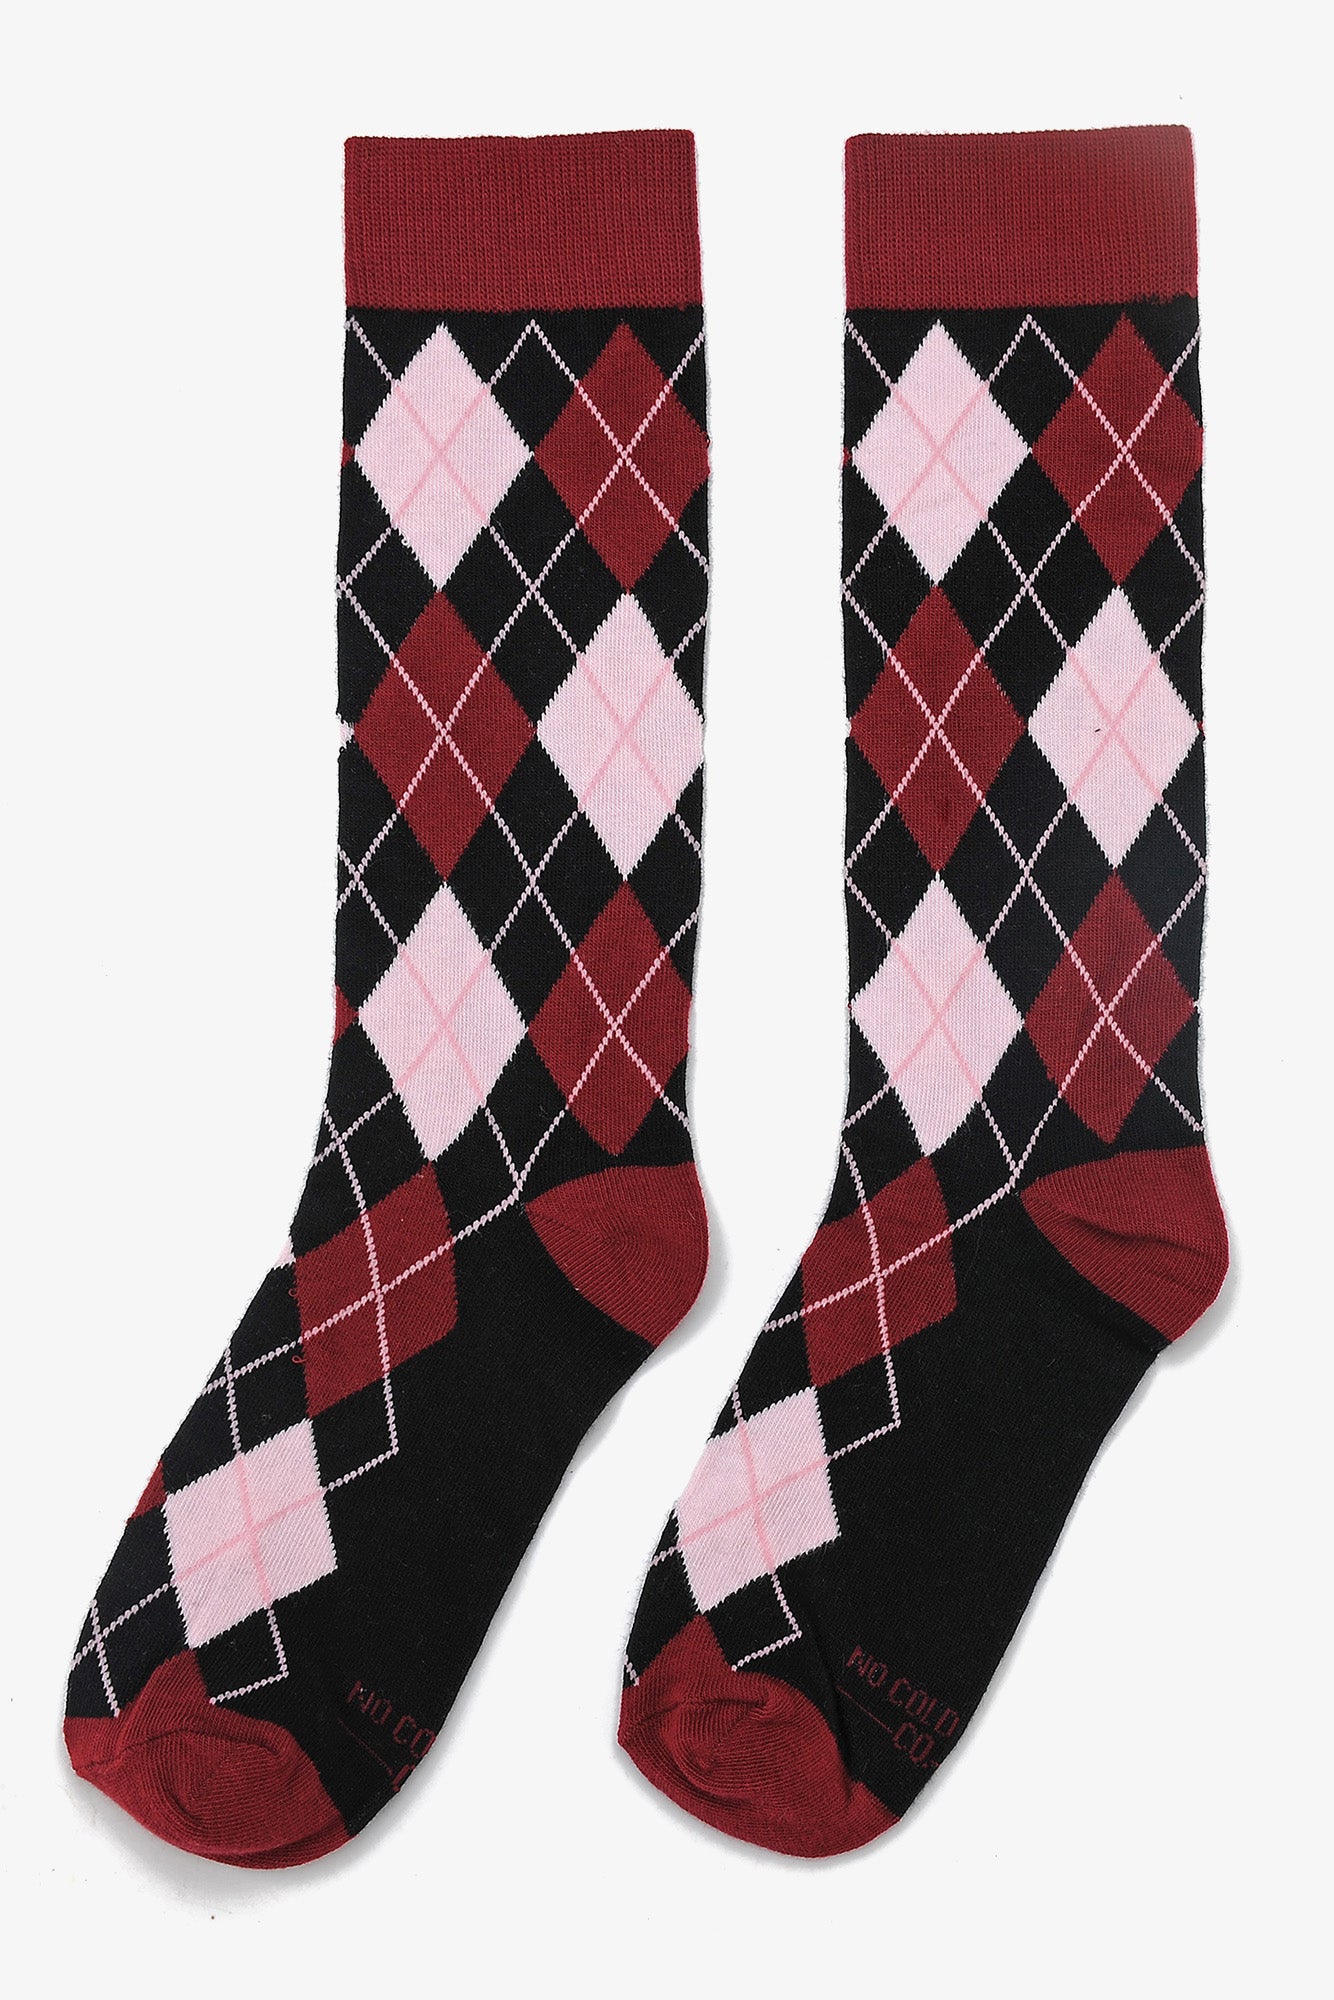 Argyle Groomsmen Socks By No Cold Feet - Red